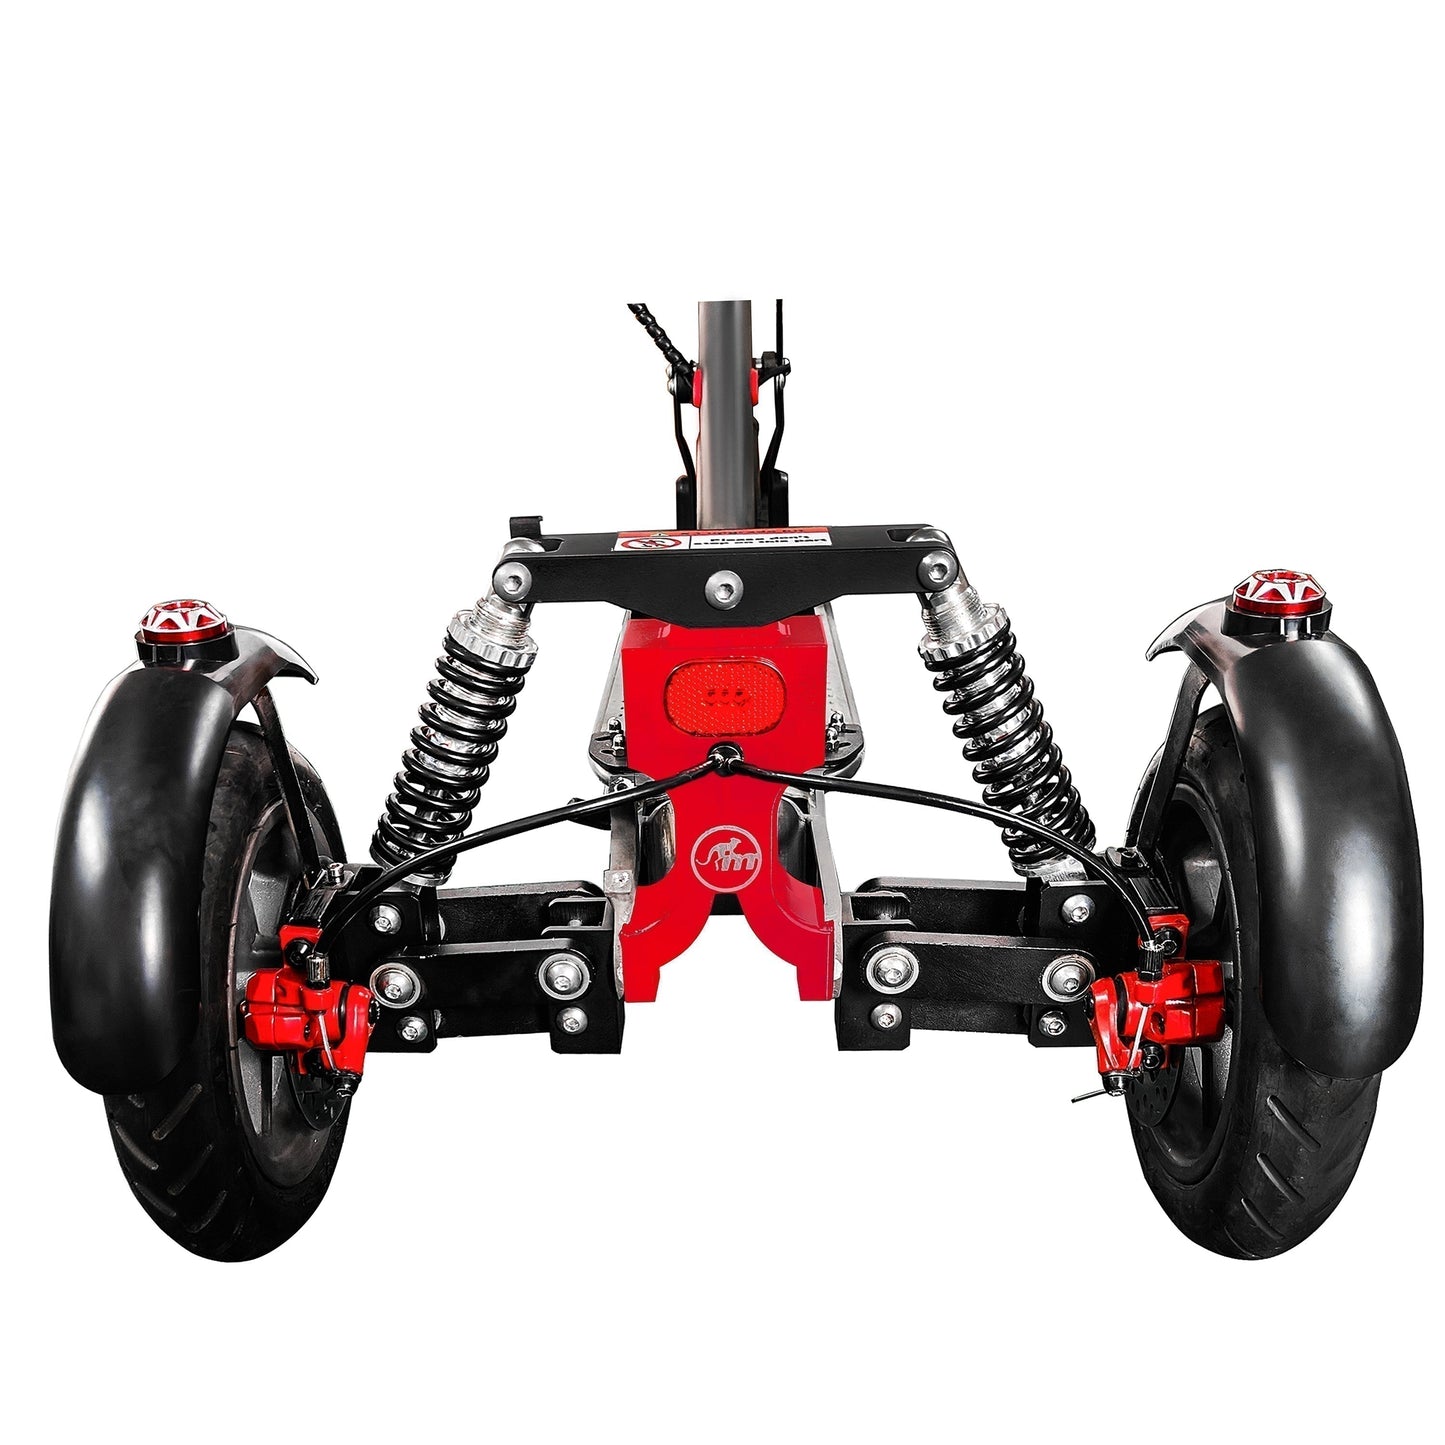 Monorim X3 upgrade kit to be Three wheels special for Flyebike H-1 Scooter